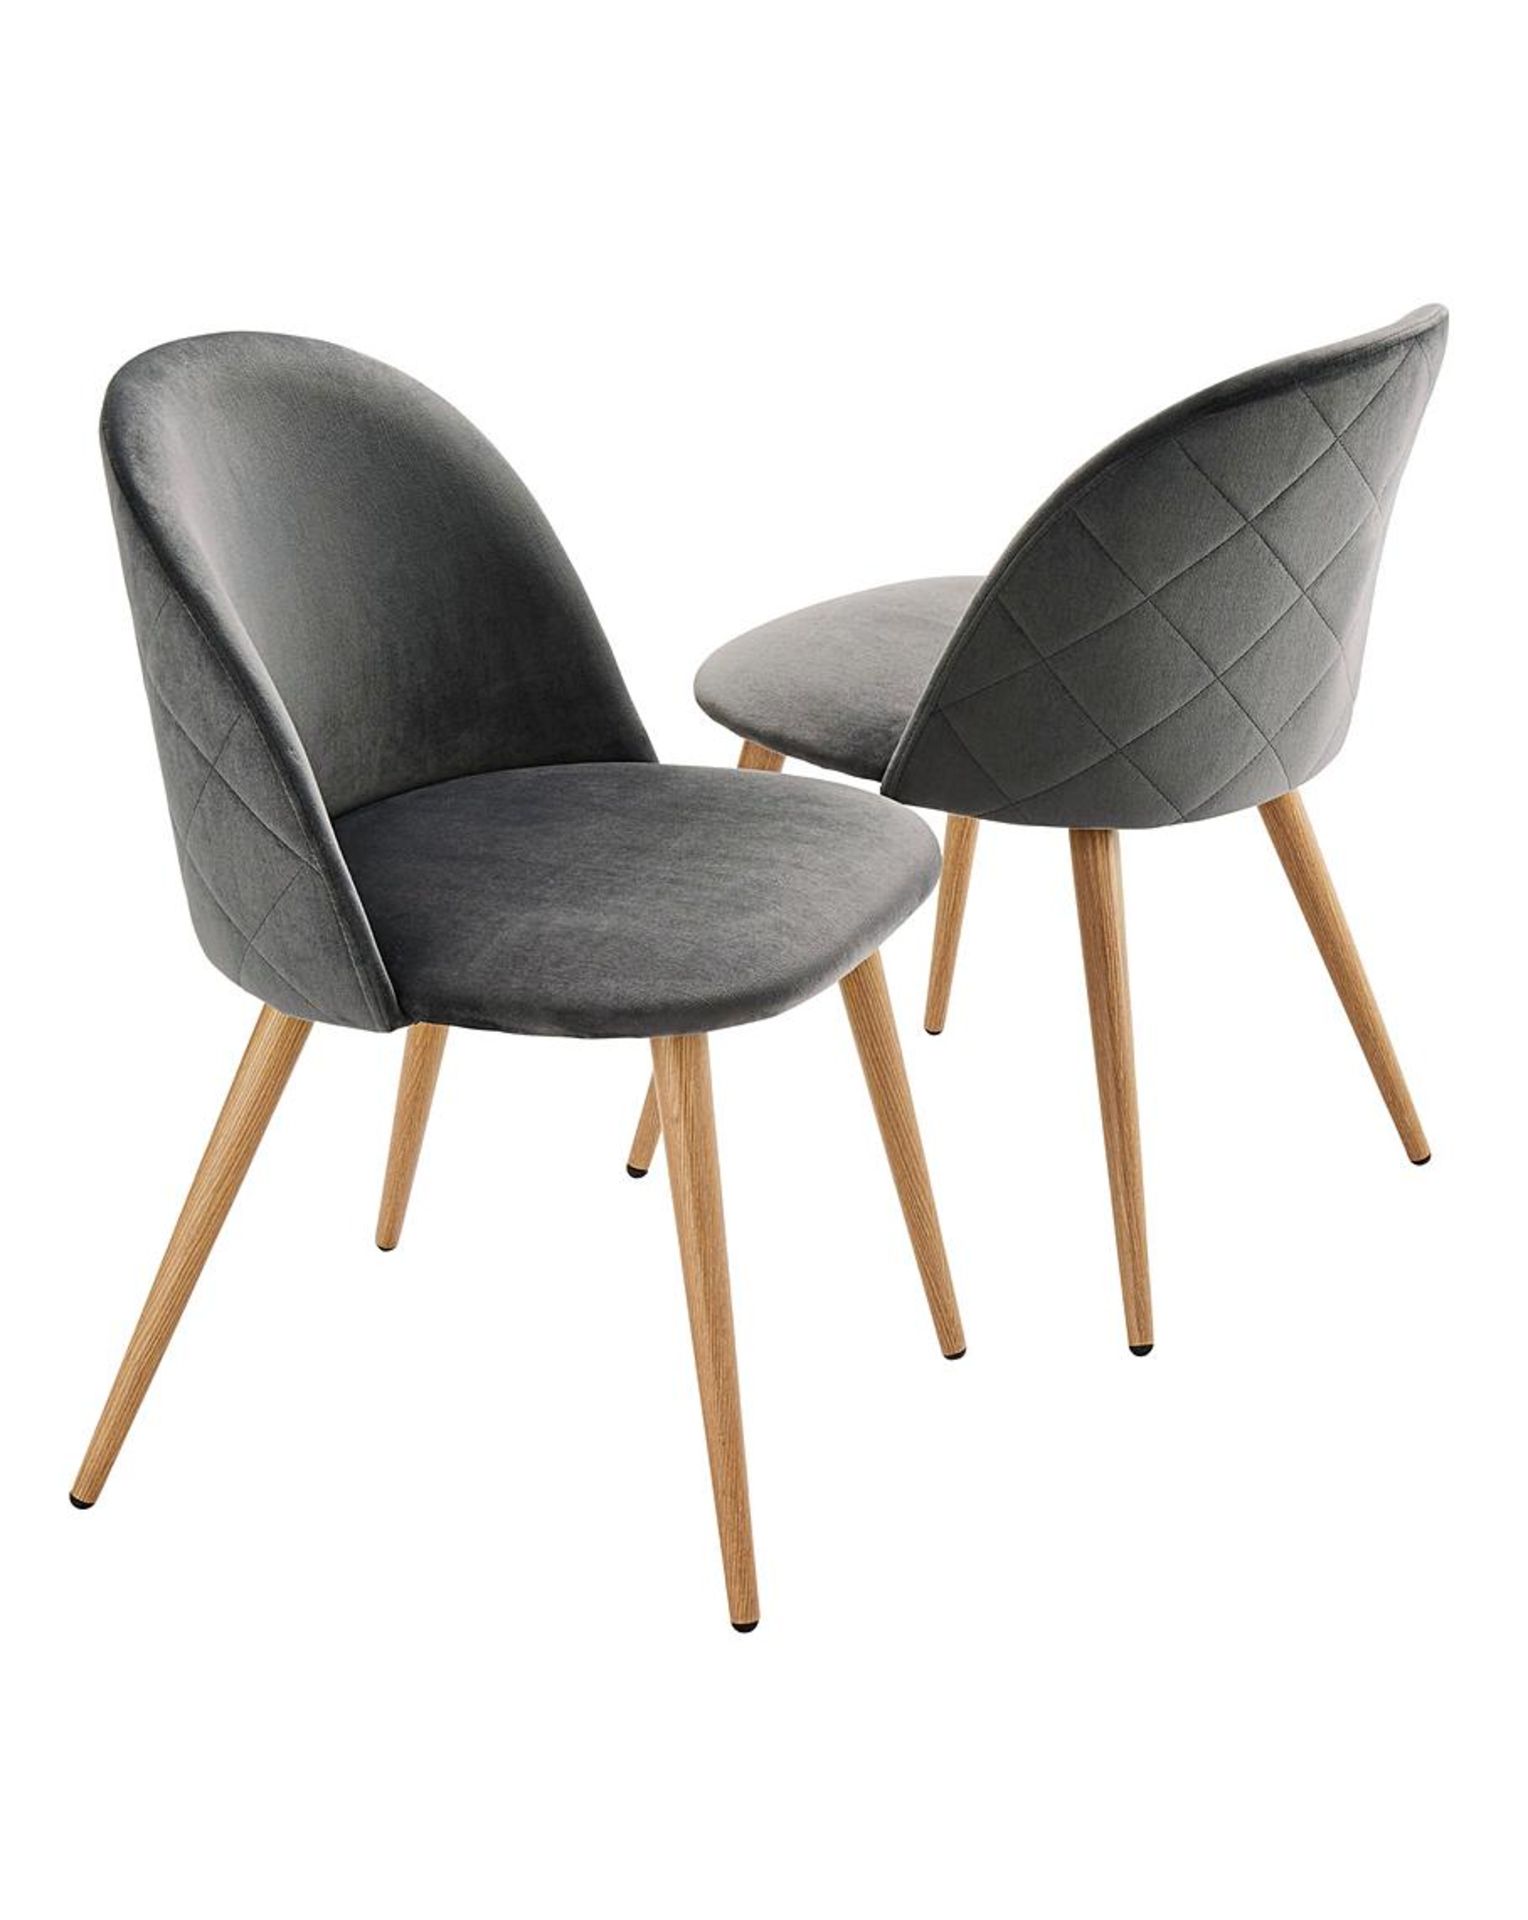 Pair of Klara Dining Chairs. - SR4. RRP £199.00. The Klara Dining Chairs are the perfect style